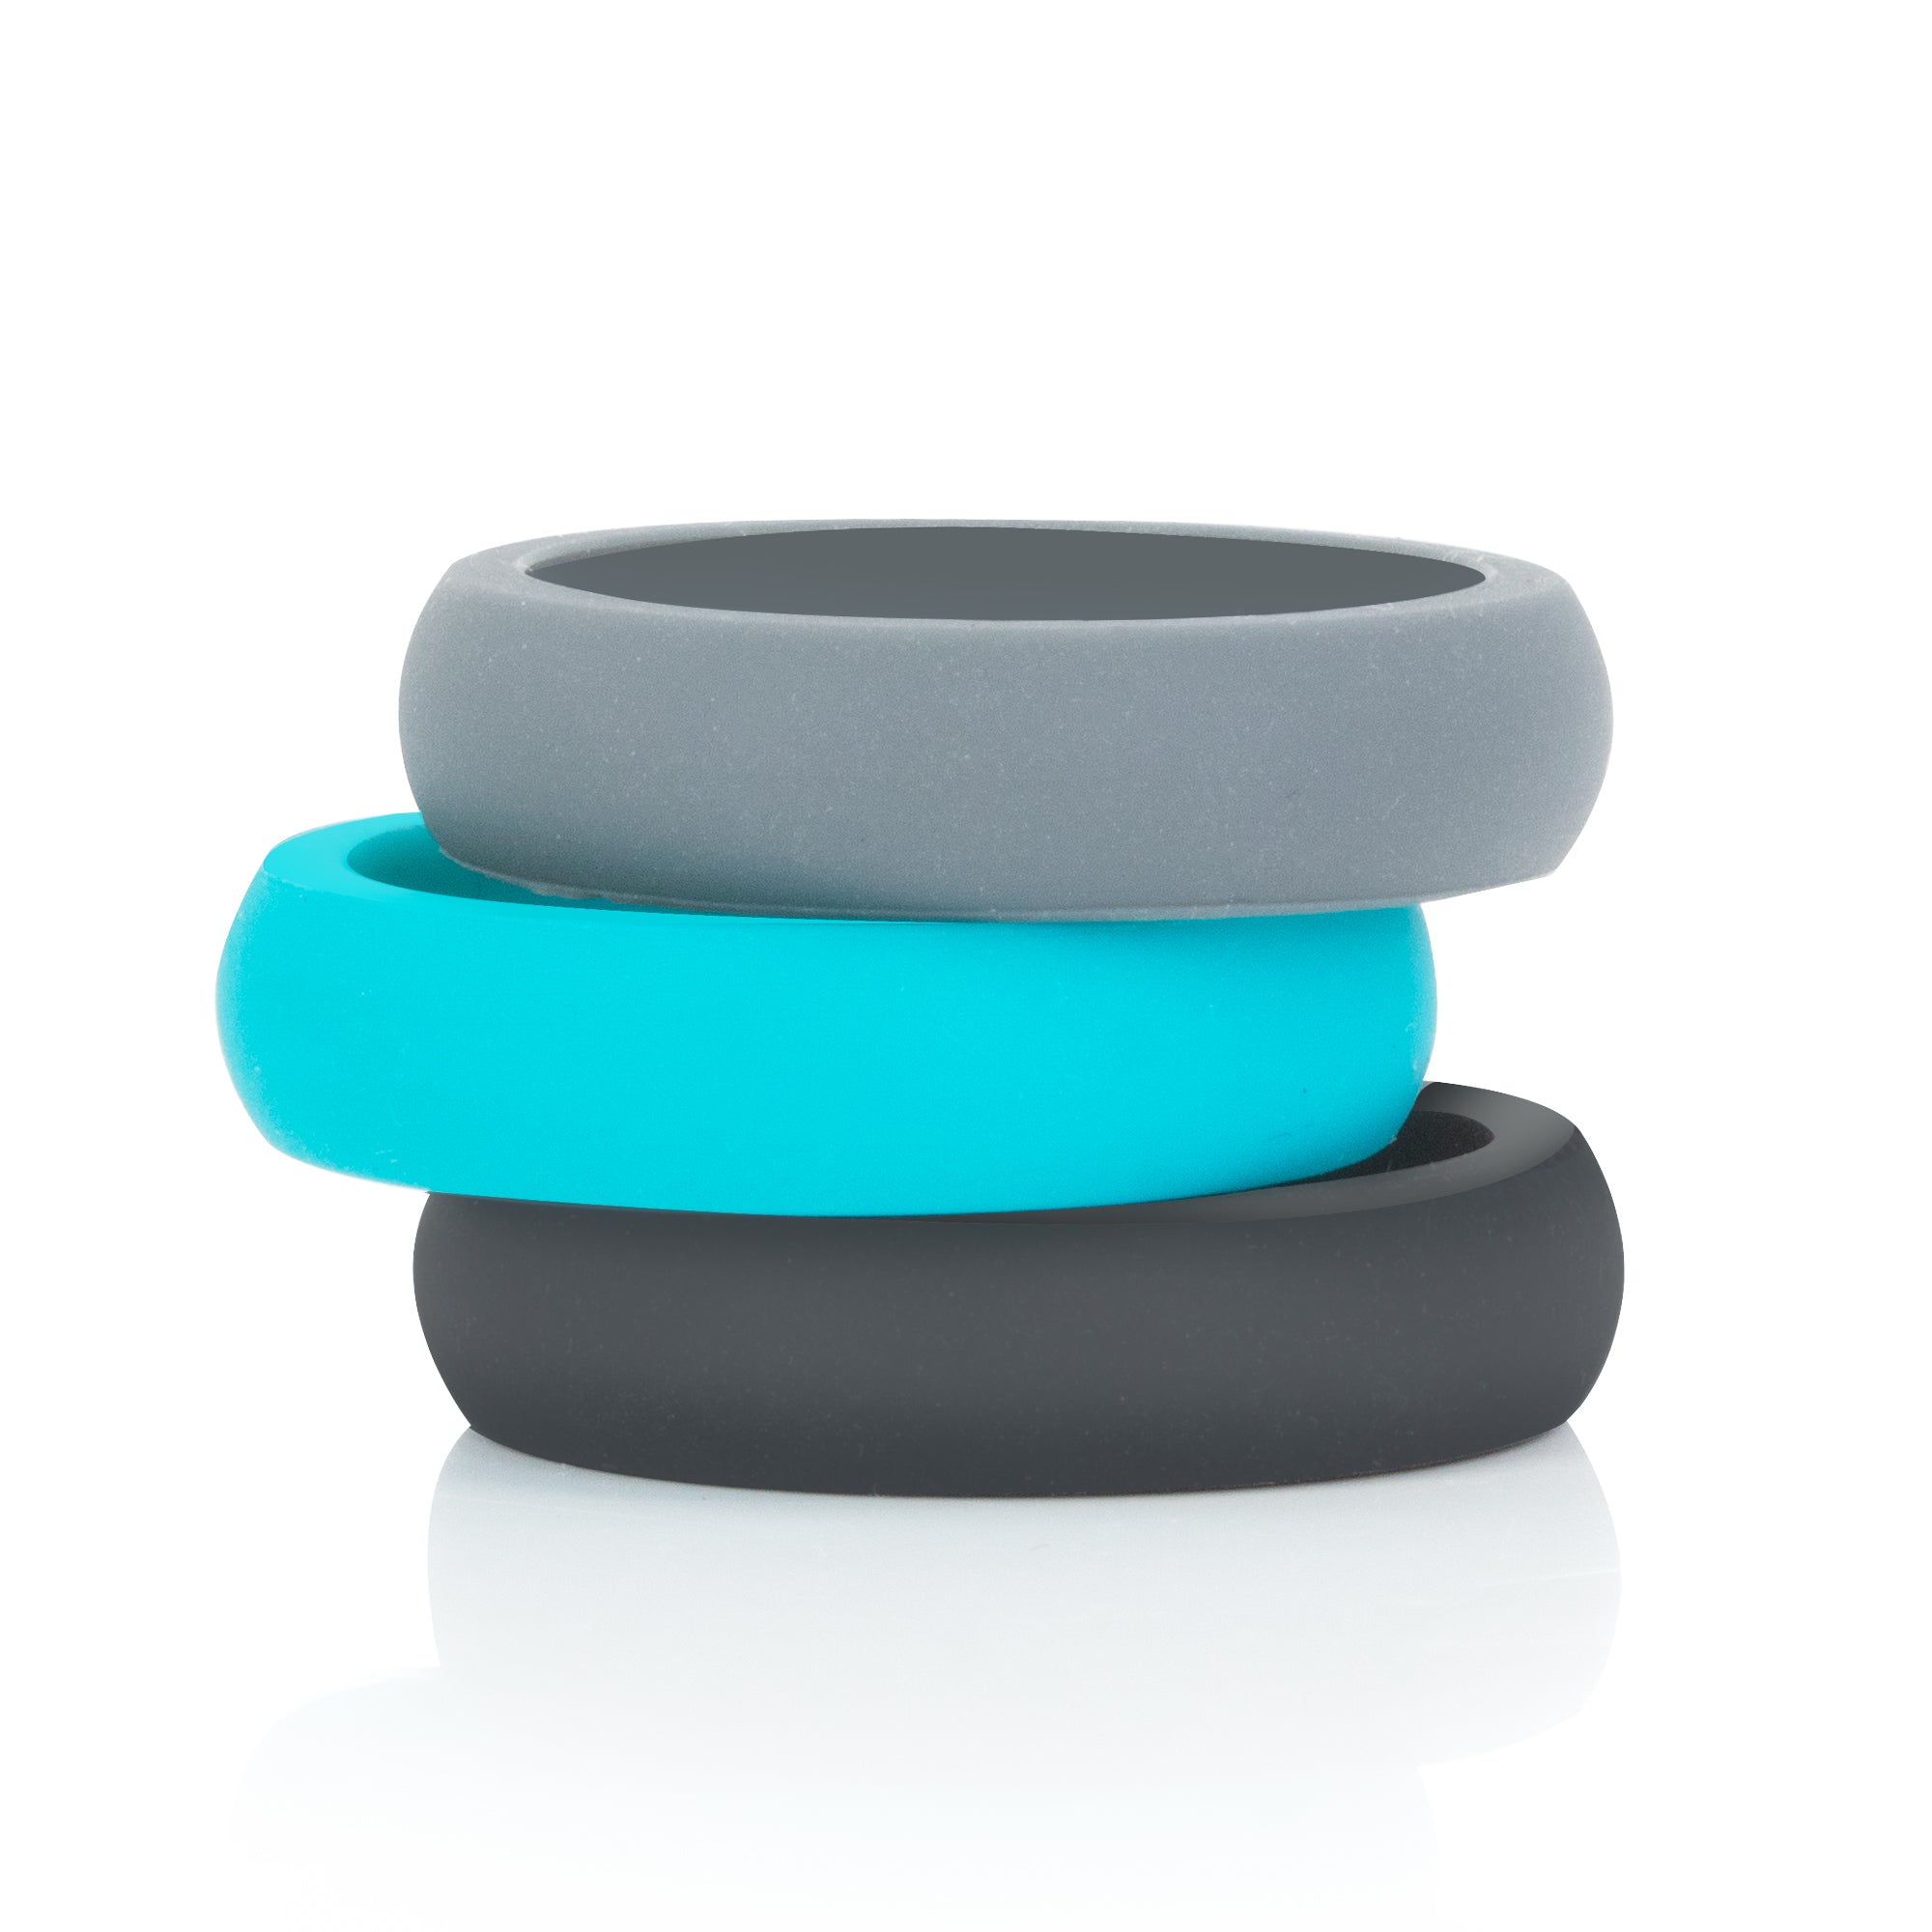 Womens 'She Bold' - Silicone ring